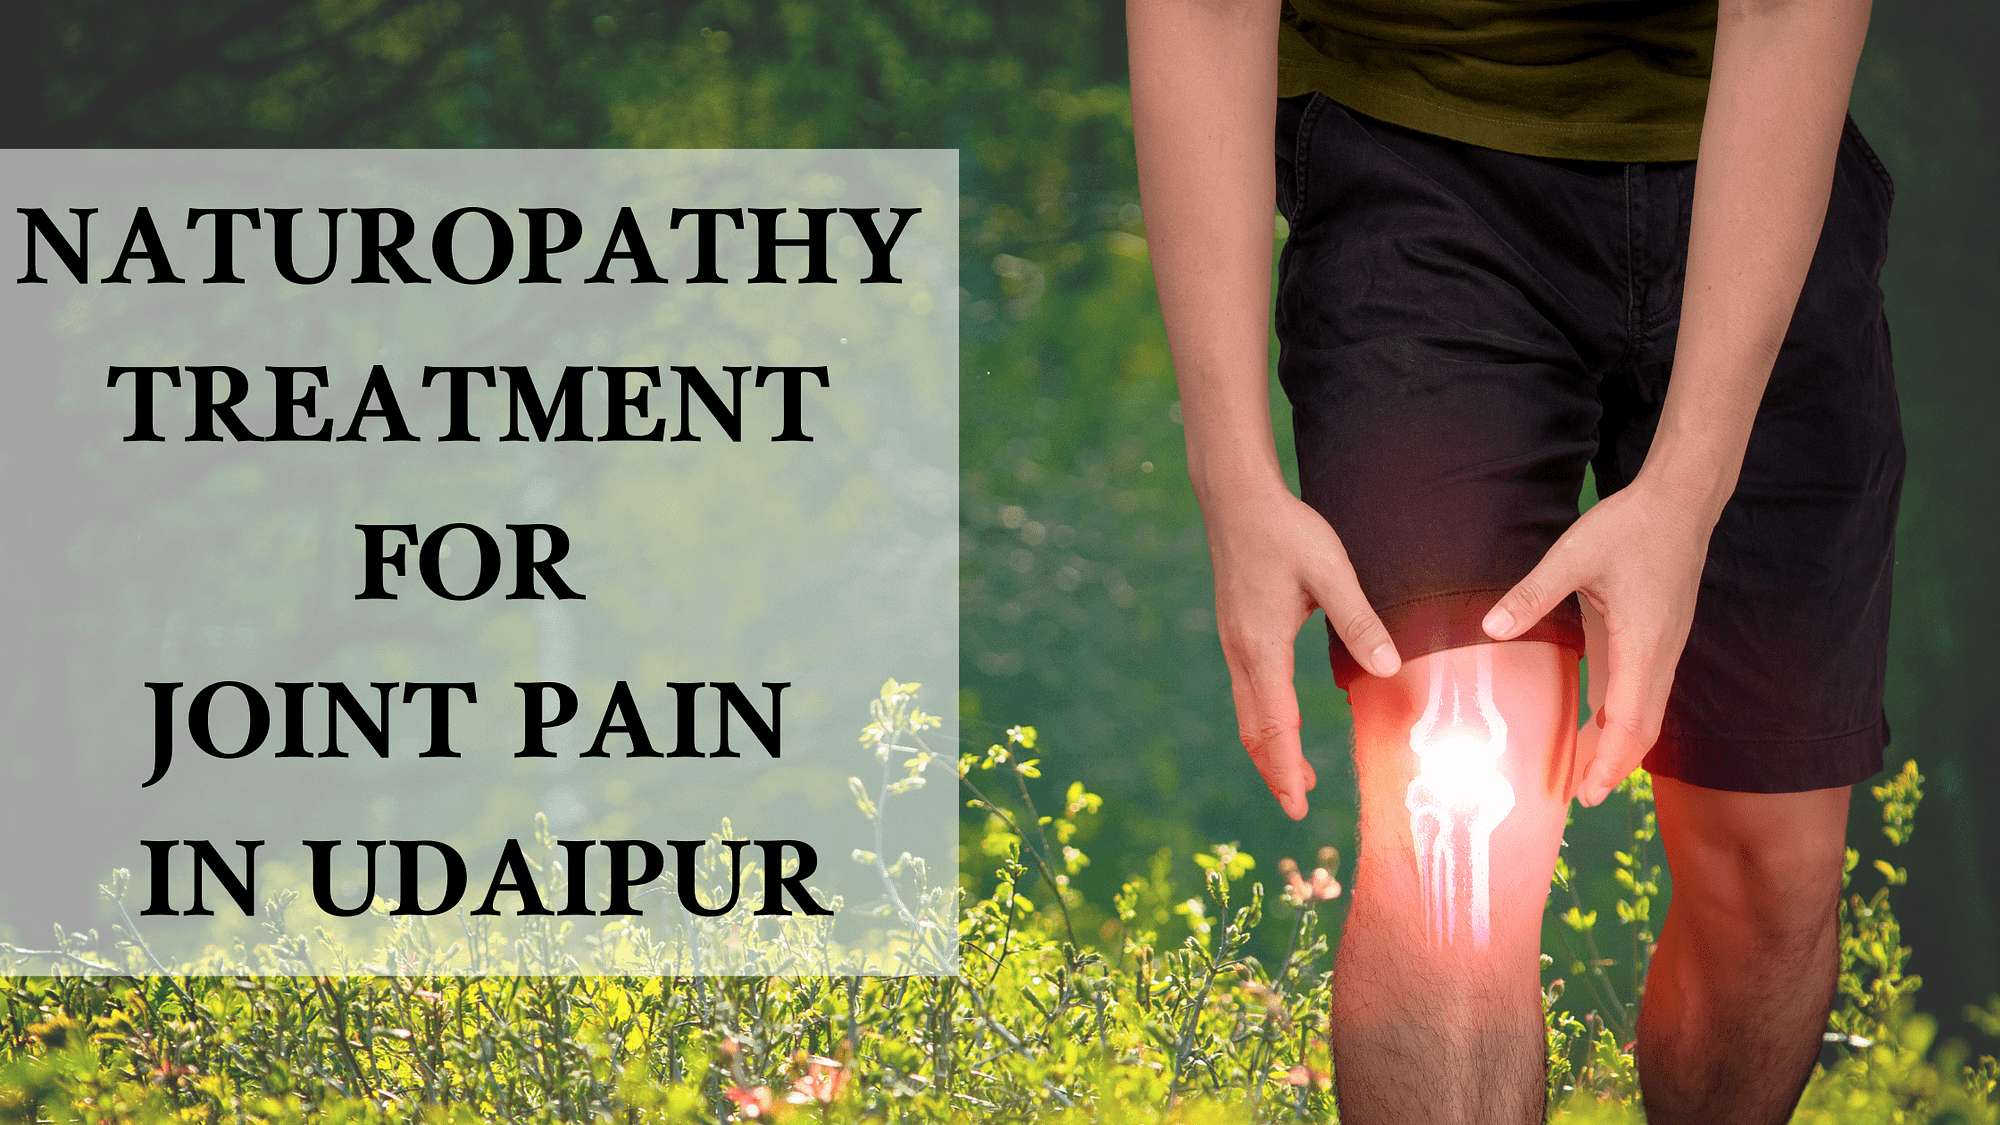 naturopathy treatment for joint pain in udaipur